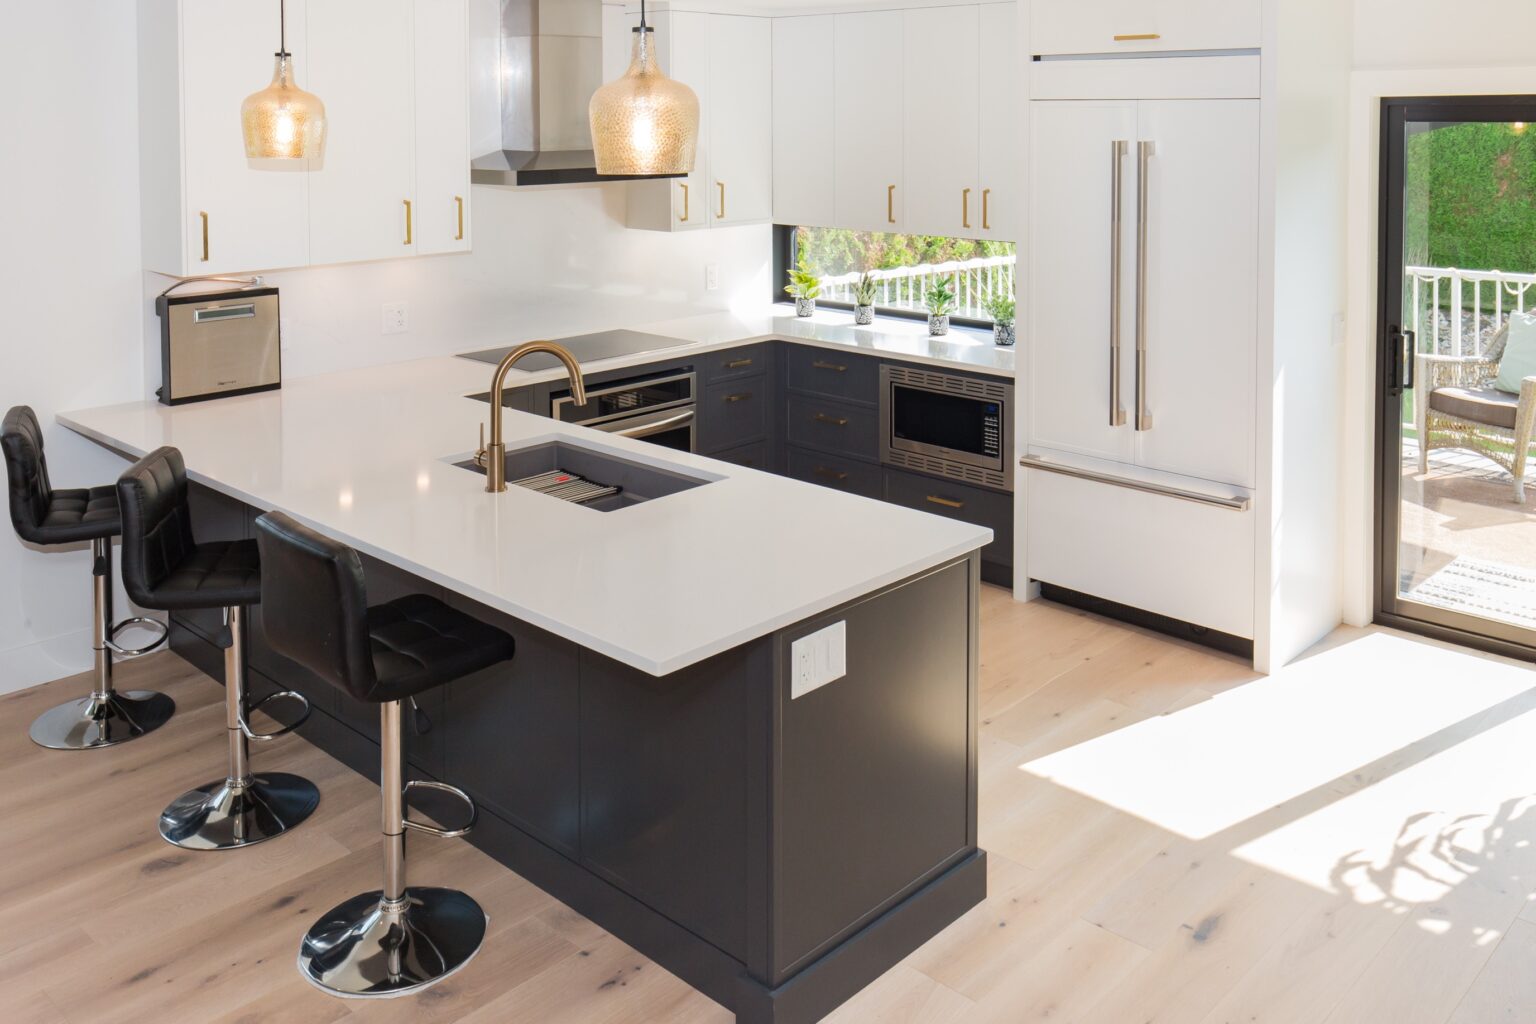 6 Popular Peninsula Kitchen Ideas for Limited Square Footage 